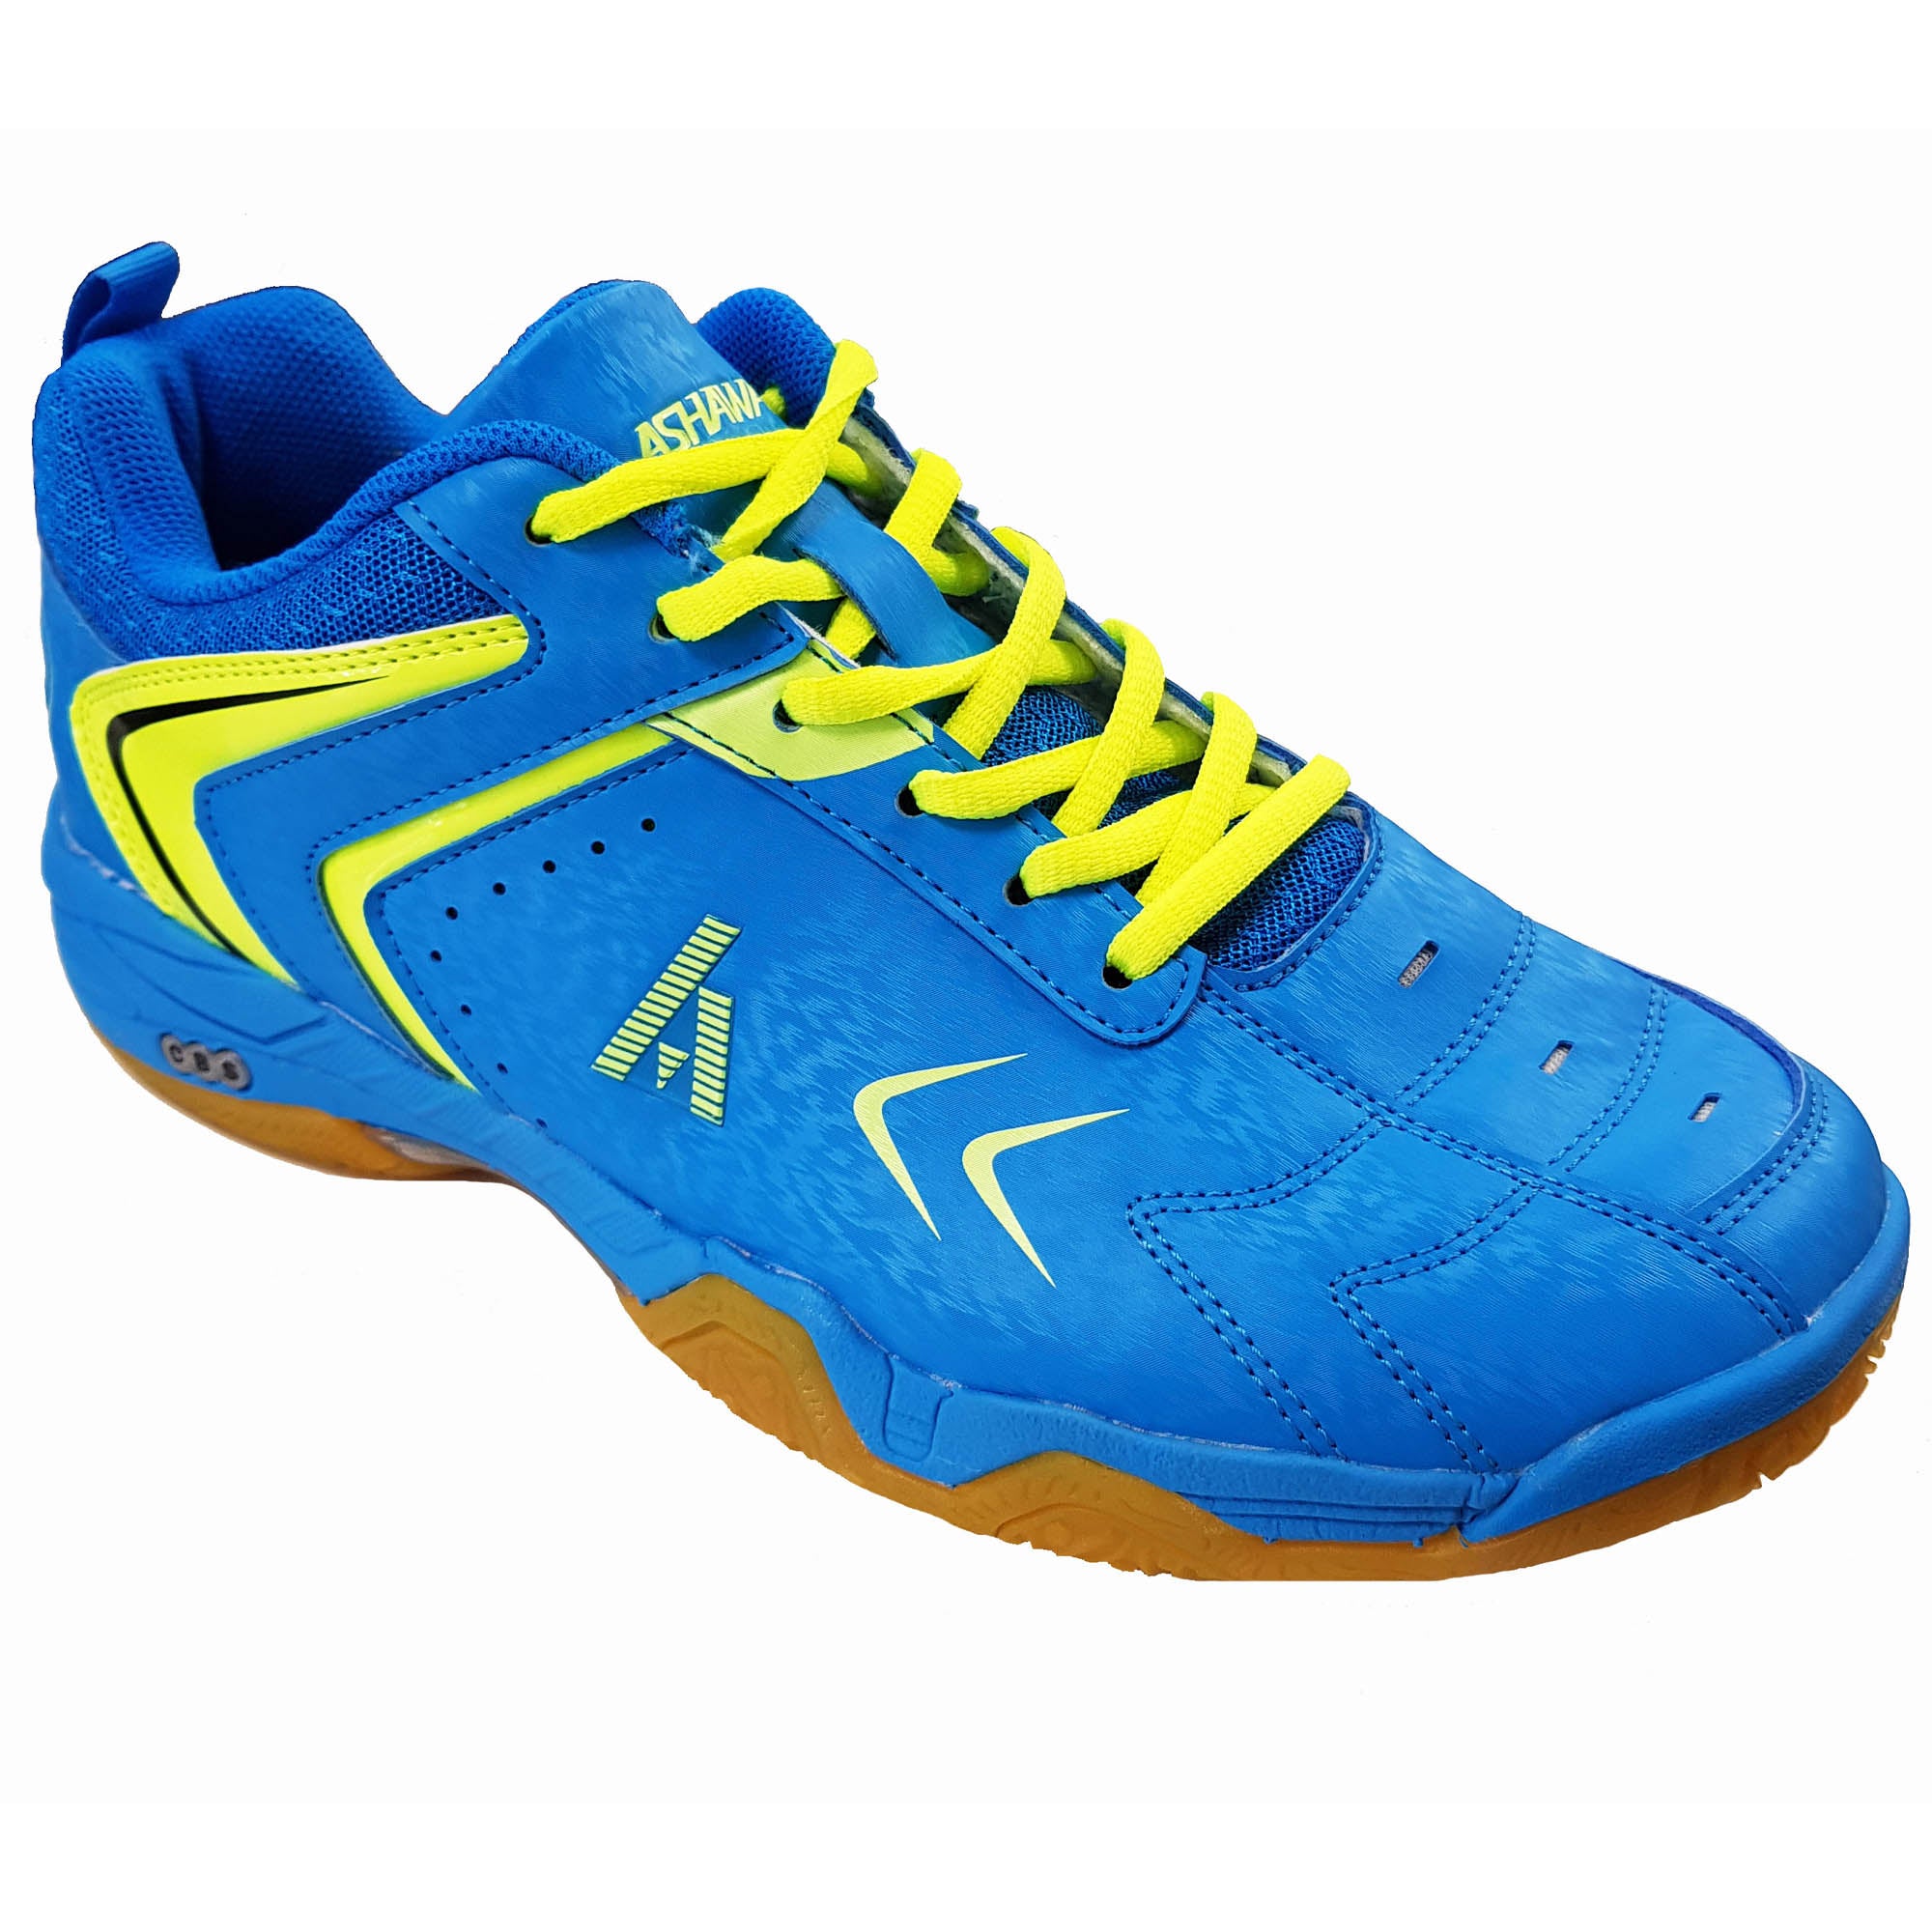 Ashaway Neo X-Glide Indoor Court Shoes from Sweatband.com